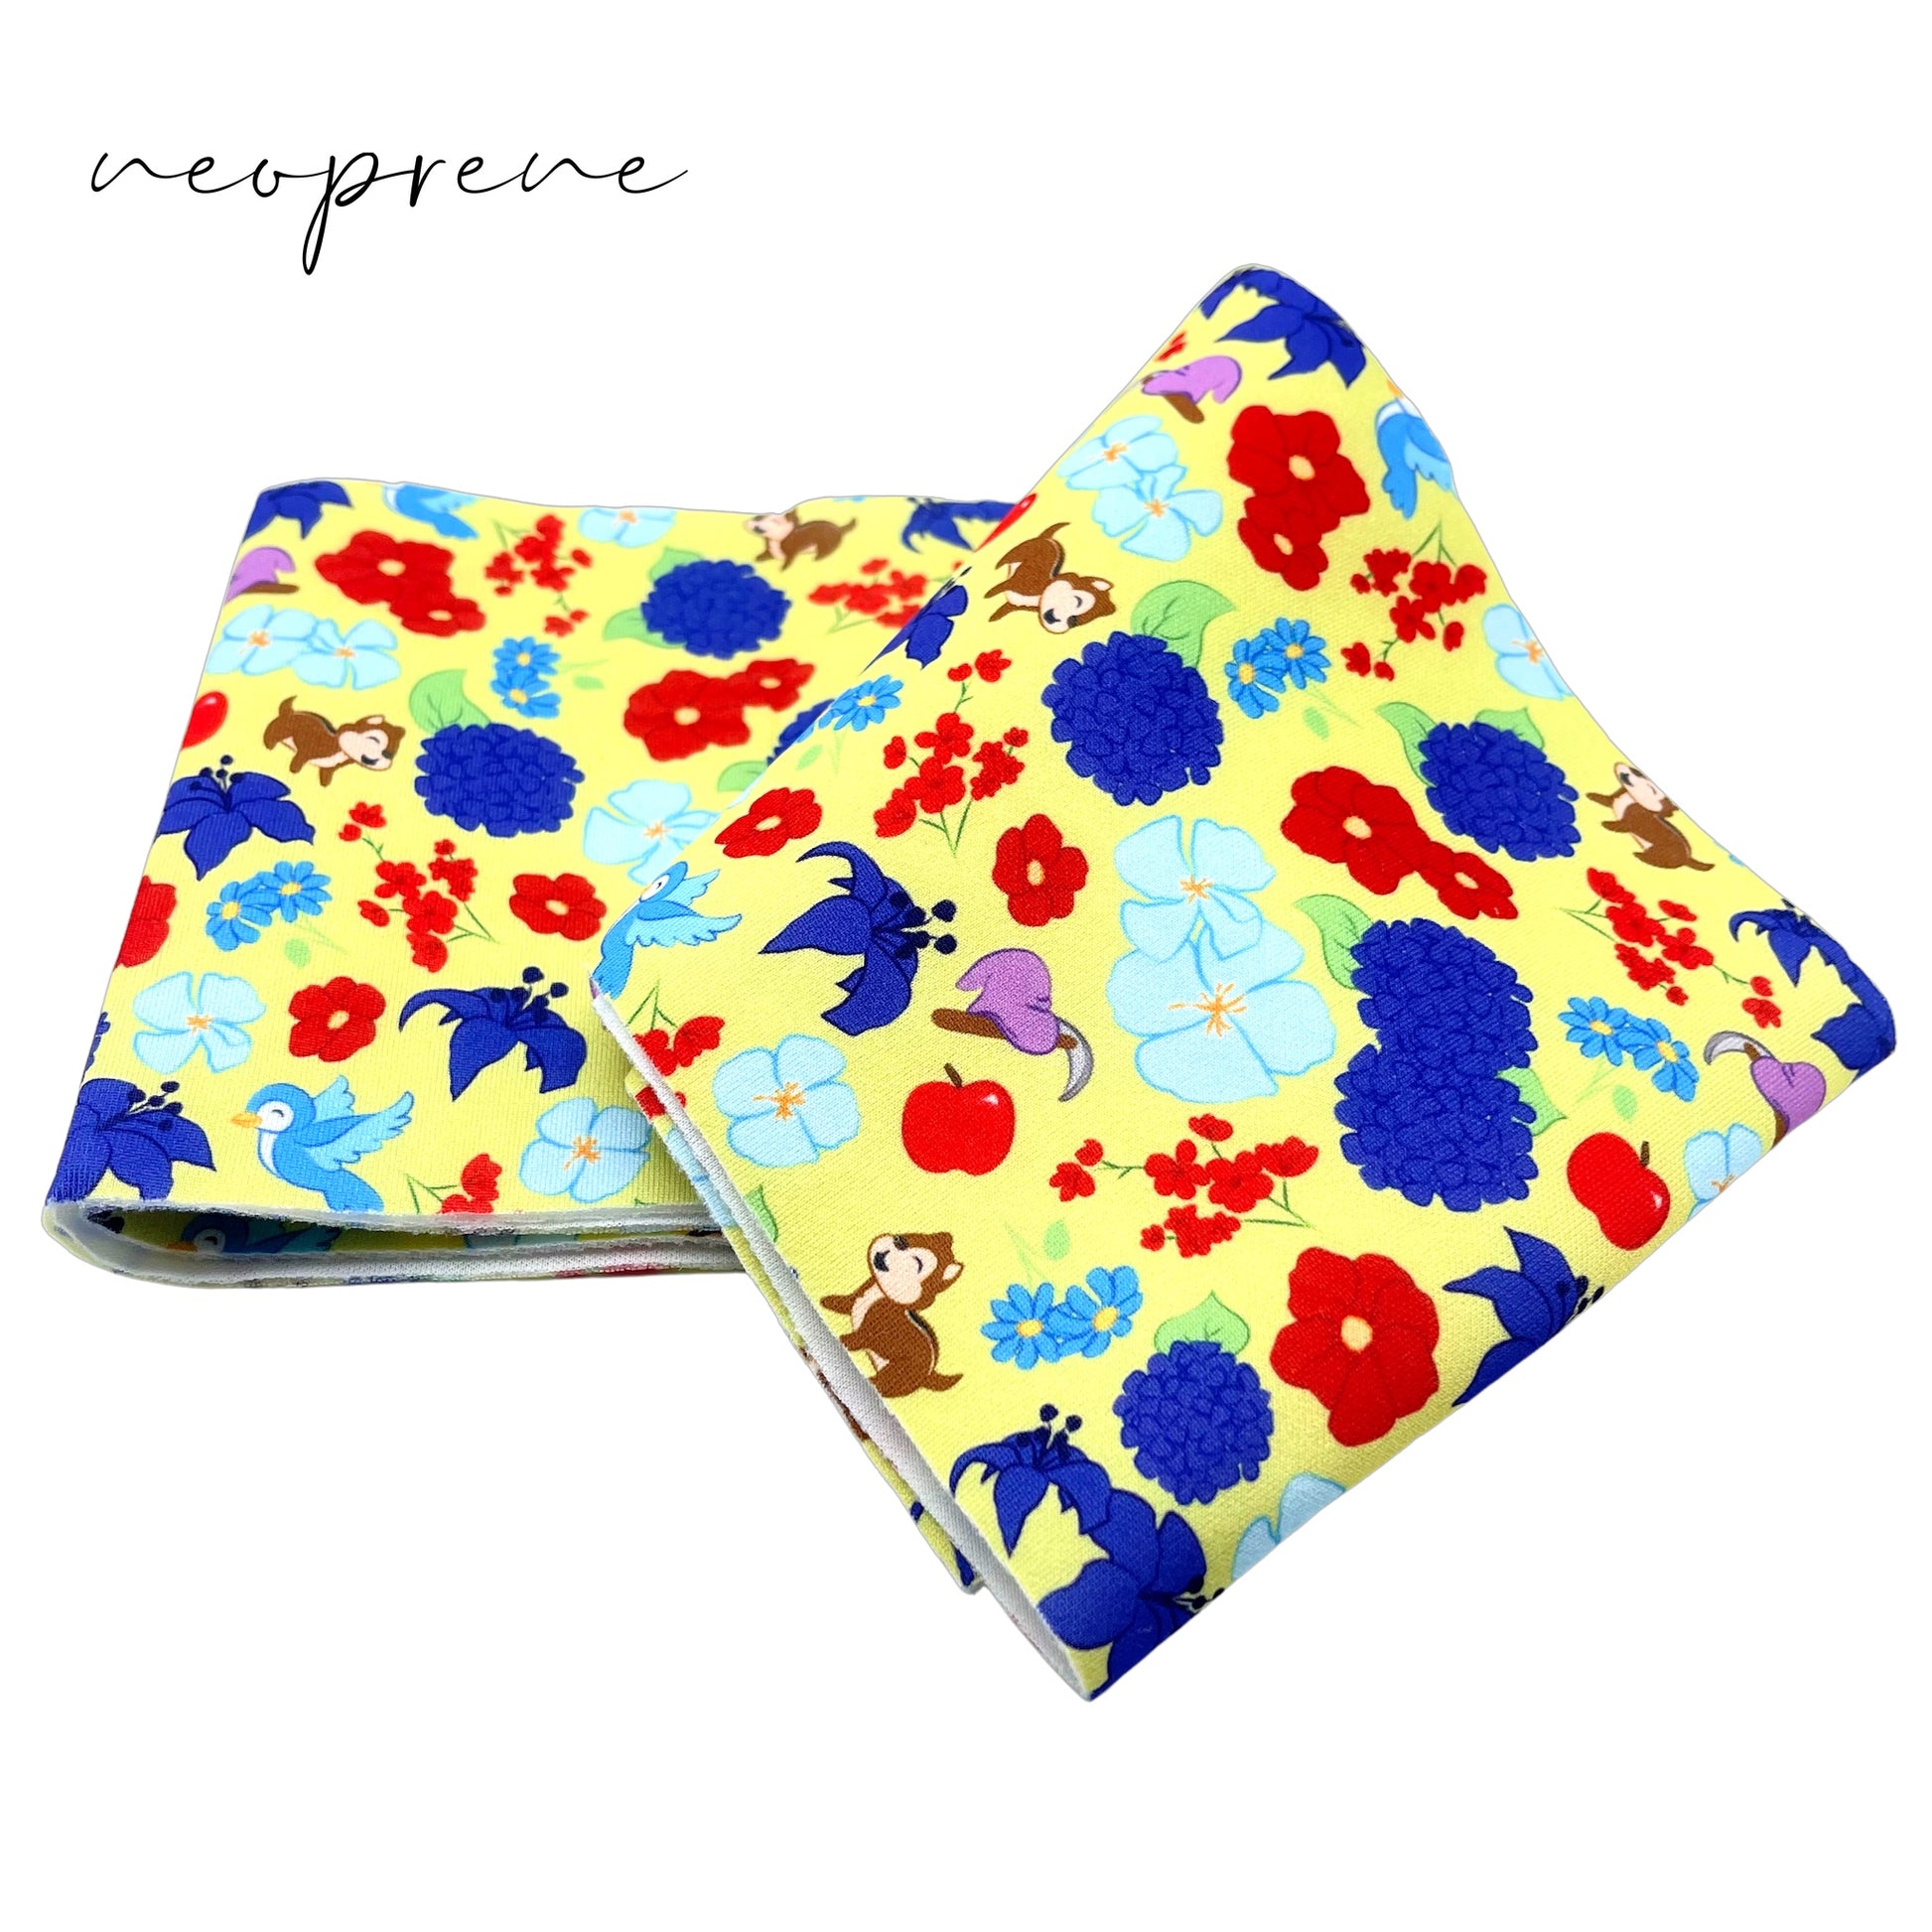 Folded yellow neoprene fabric strip with royal, red, and light blue floral princess pattern including chipmunks, hat and axe, apple, and blue bird.